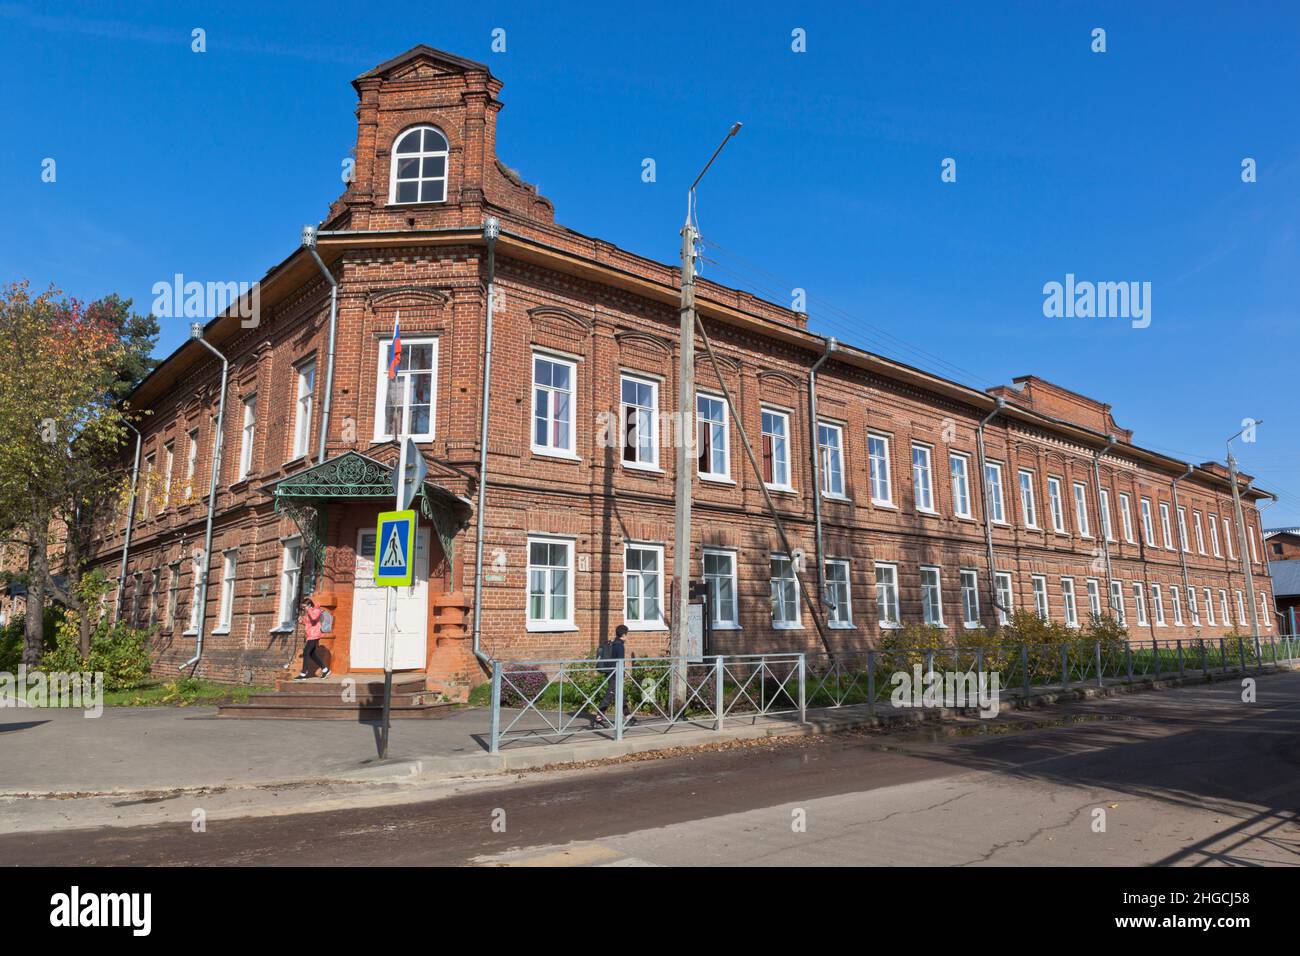 Totma, Vologda region, Russia - September 24, 2020: The ancient building of the secondary school number 3 in the city of Totma, Vologda region Stock Photo